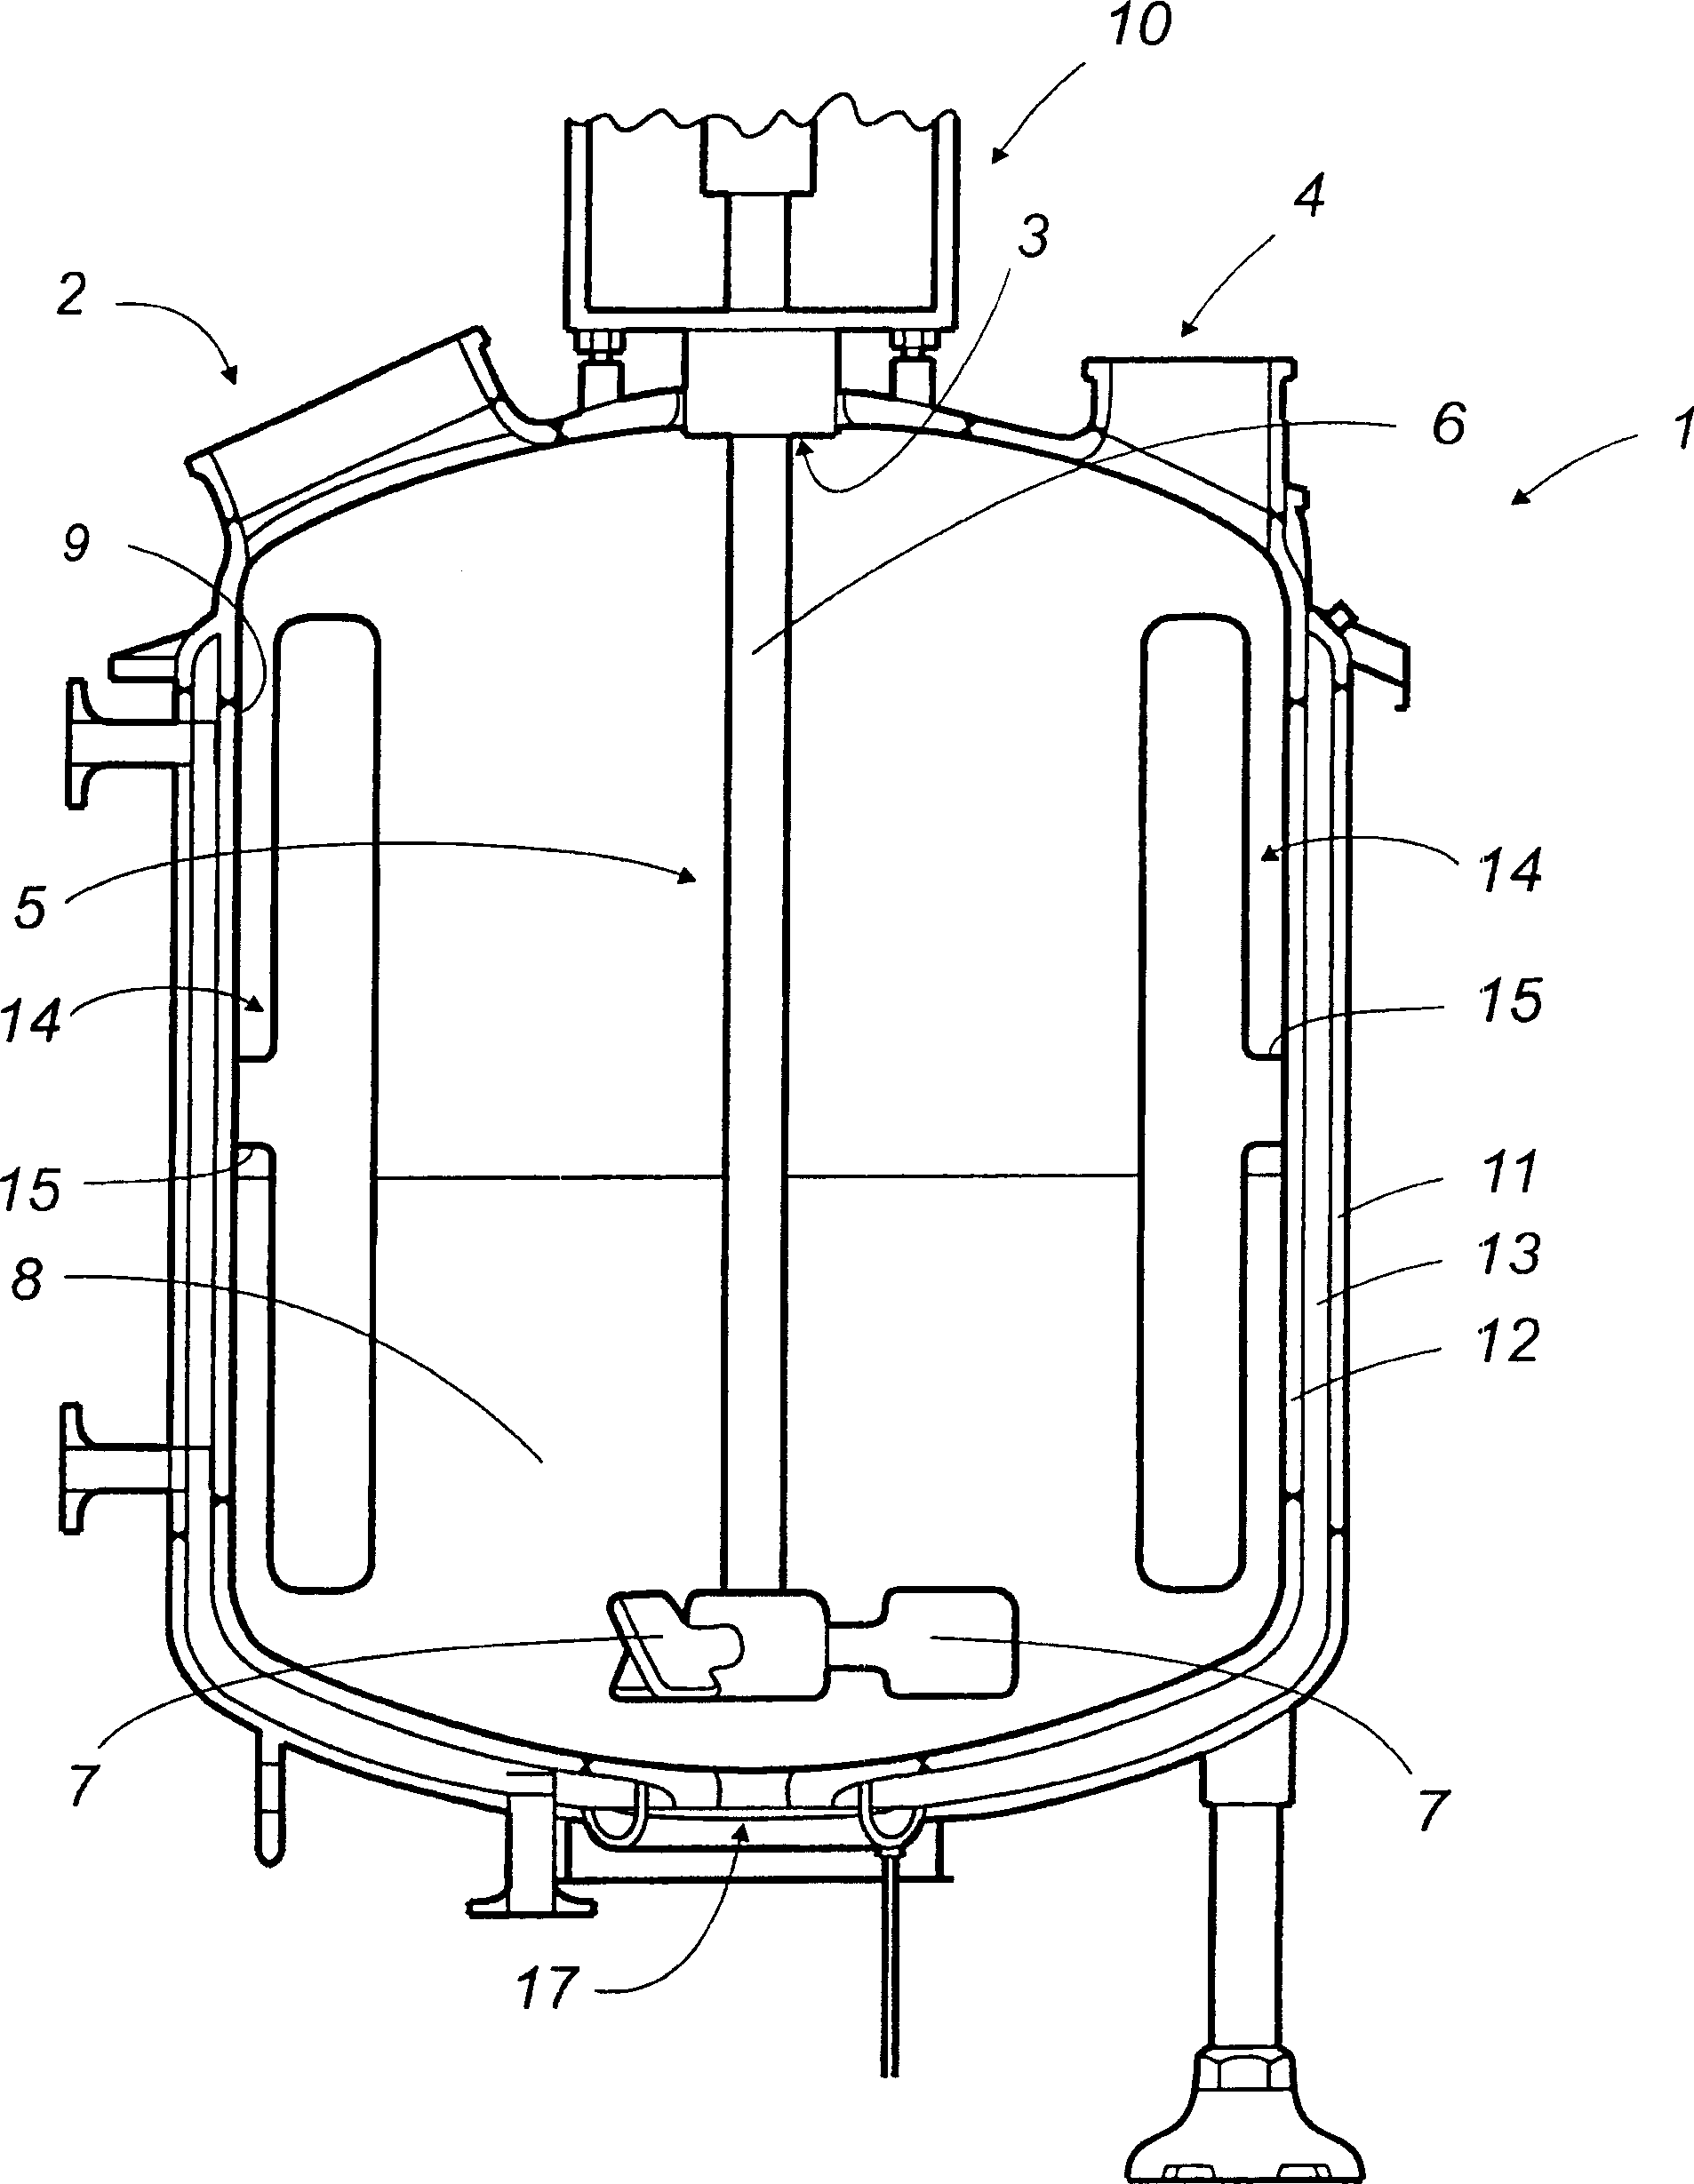 Baffle fixed at a separation from the internal wall of an enamelled container by means of a local connection